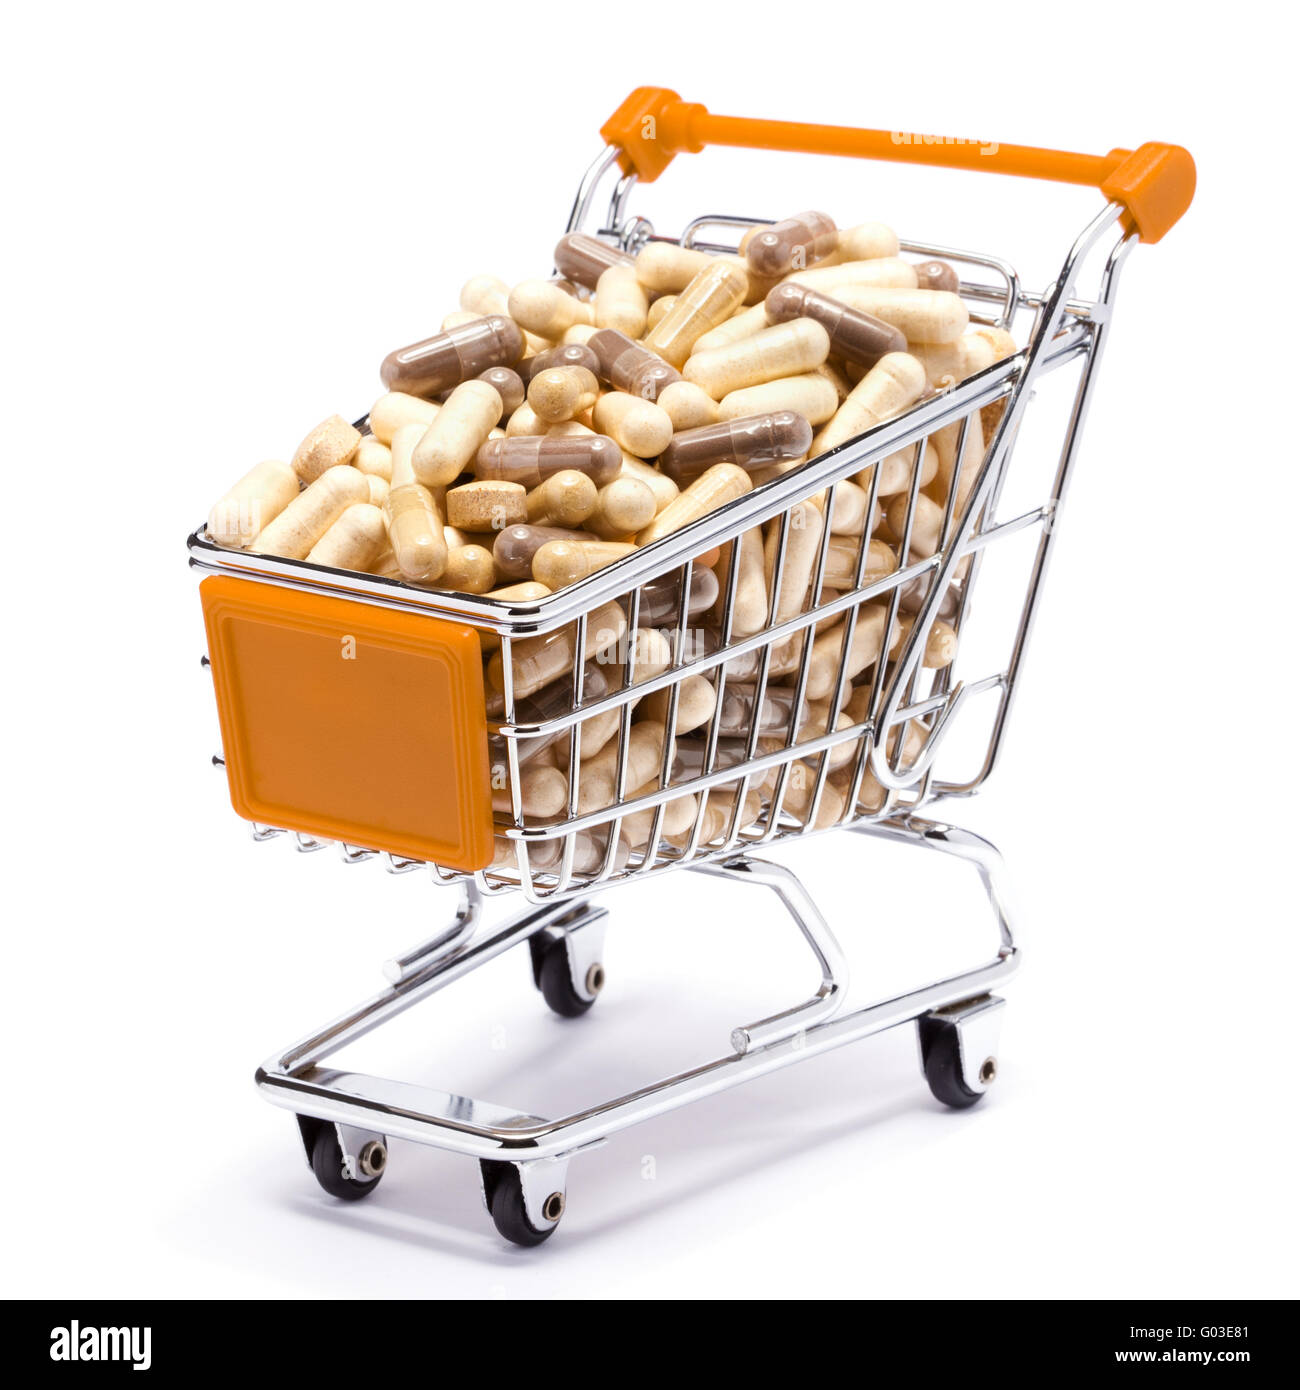 Carts on a white background filled with pills Stock Photo